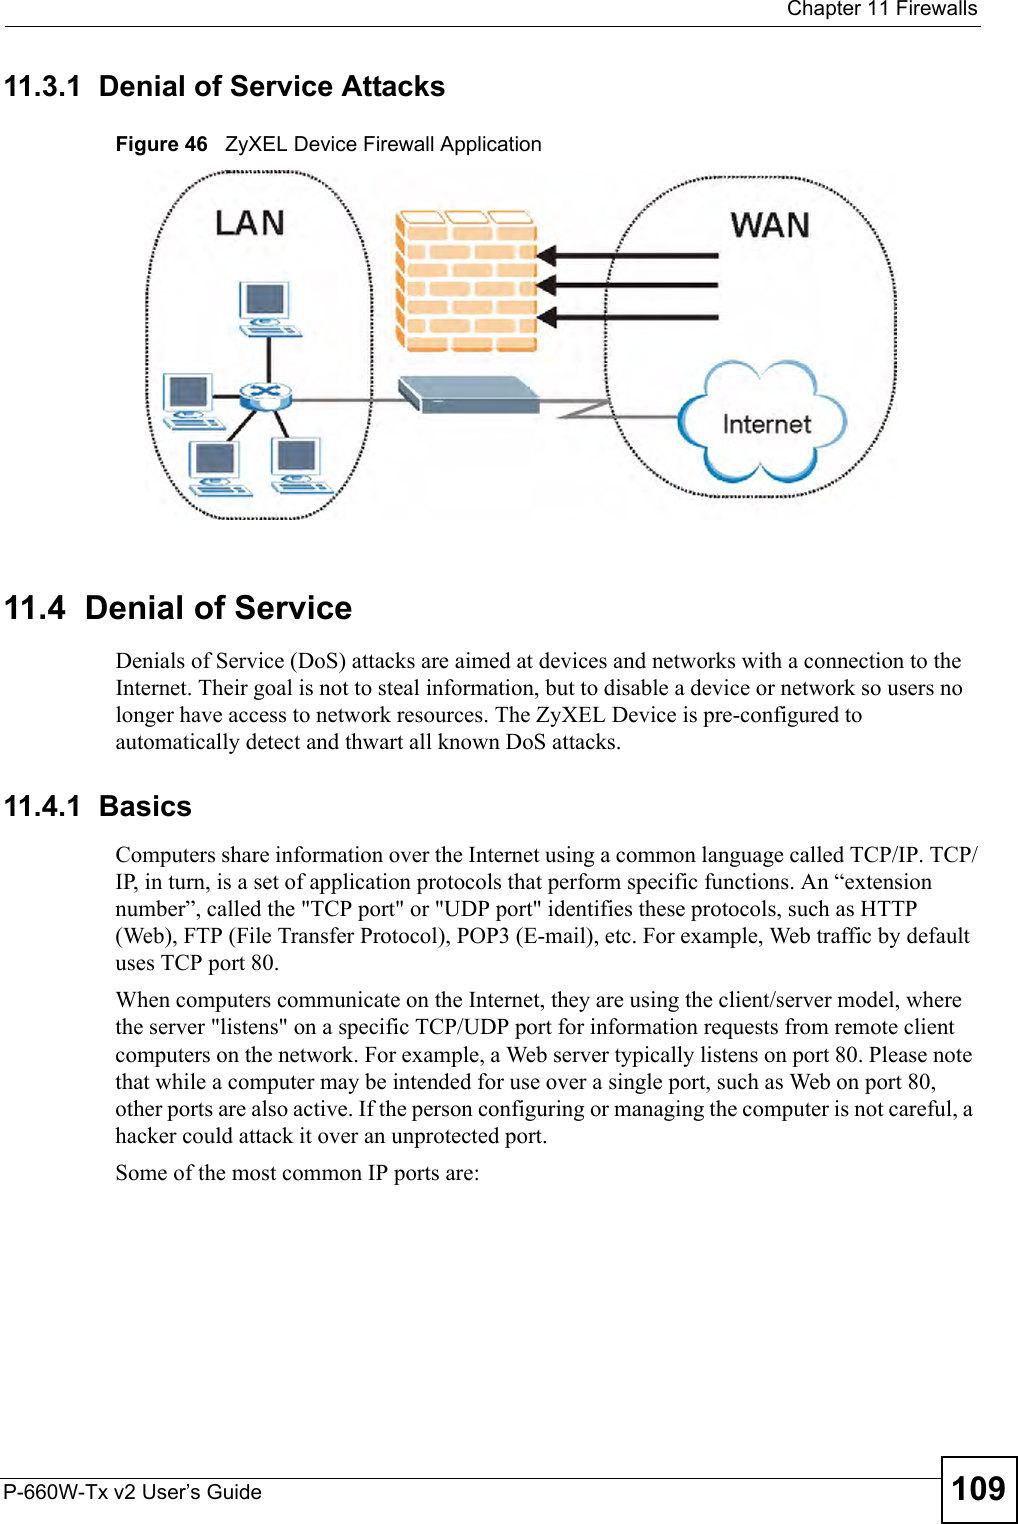  Chapter 11 FirewallsP-660W-Tx v2 User’s Guide 10911.3.1  Denial of Service AttacksFigure 46   ZyXEL Device Firewall Application11.4  Denial of ServiceDenials of Service (DoS) attacks are aimed at devices and networks with a connection to the Internet. Their goal is not to steal information, but to disable a device or network so users no longer have access to network resources. The ZyXEL Device is pre-configured to automatically detect and thwart all known DoS attacks.11.4.1  BasicsComputers share information over the Internet using a common language called TCP/IP. TCP/IP, in turn, is a set of application protocols that perform specific functions. An “extension number”, called the &quot;TCP port&quot; or &quot;UDP port&quot; identifies these protocols, such as HTTP (Web), FTP (File Transfer Protocol), POP3 (E-mail), etc. For example, Web traffic by default uses TCP port 80. When computers communicate on the Internet, they are using the client/server model, where the server &quot;listens&quot; on a specific TCP/UDP port for information requests from remote client computers on the network. For example, a Web server typically listens on port 80. Please note that while a computer may be intended for use over a single port, such as Web on port 80, other ports are also active. If the person configuring or managing the computer is not careful, a hacker could attack it over an unprotected port. Some of the most common IP ports are: 